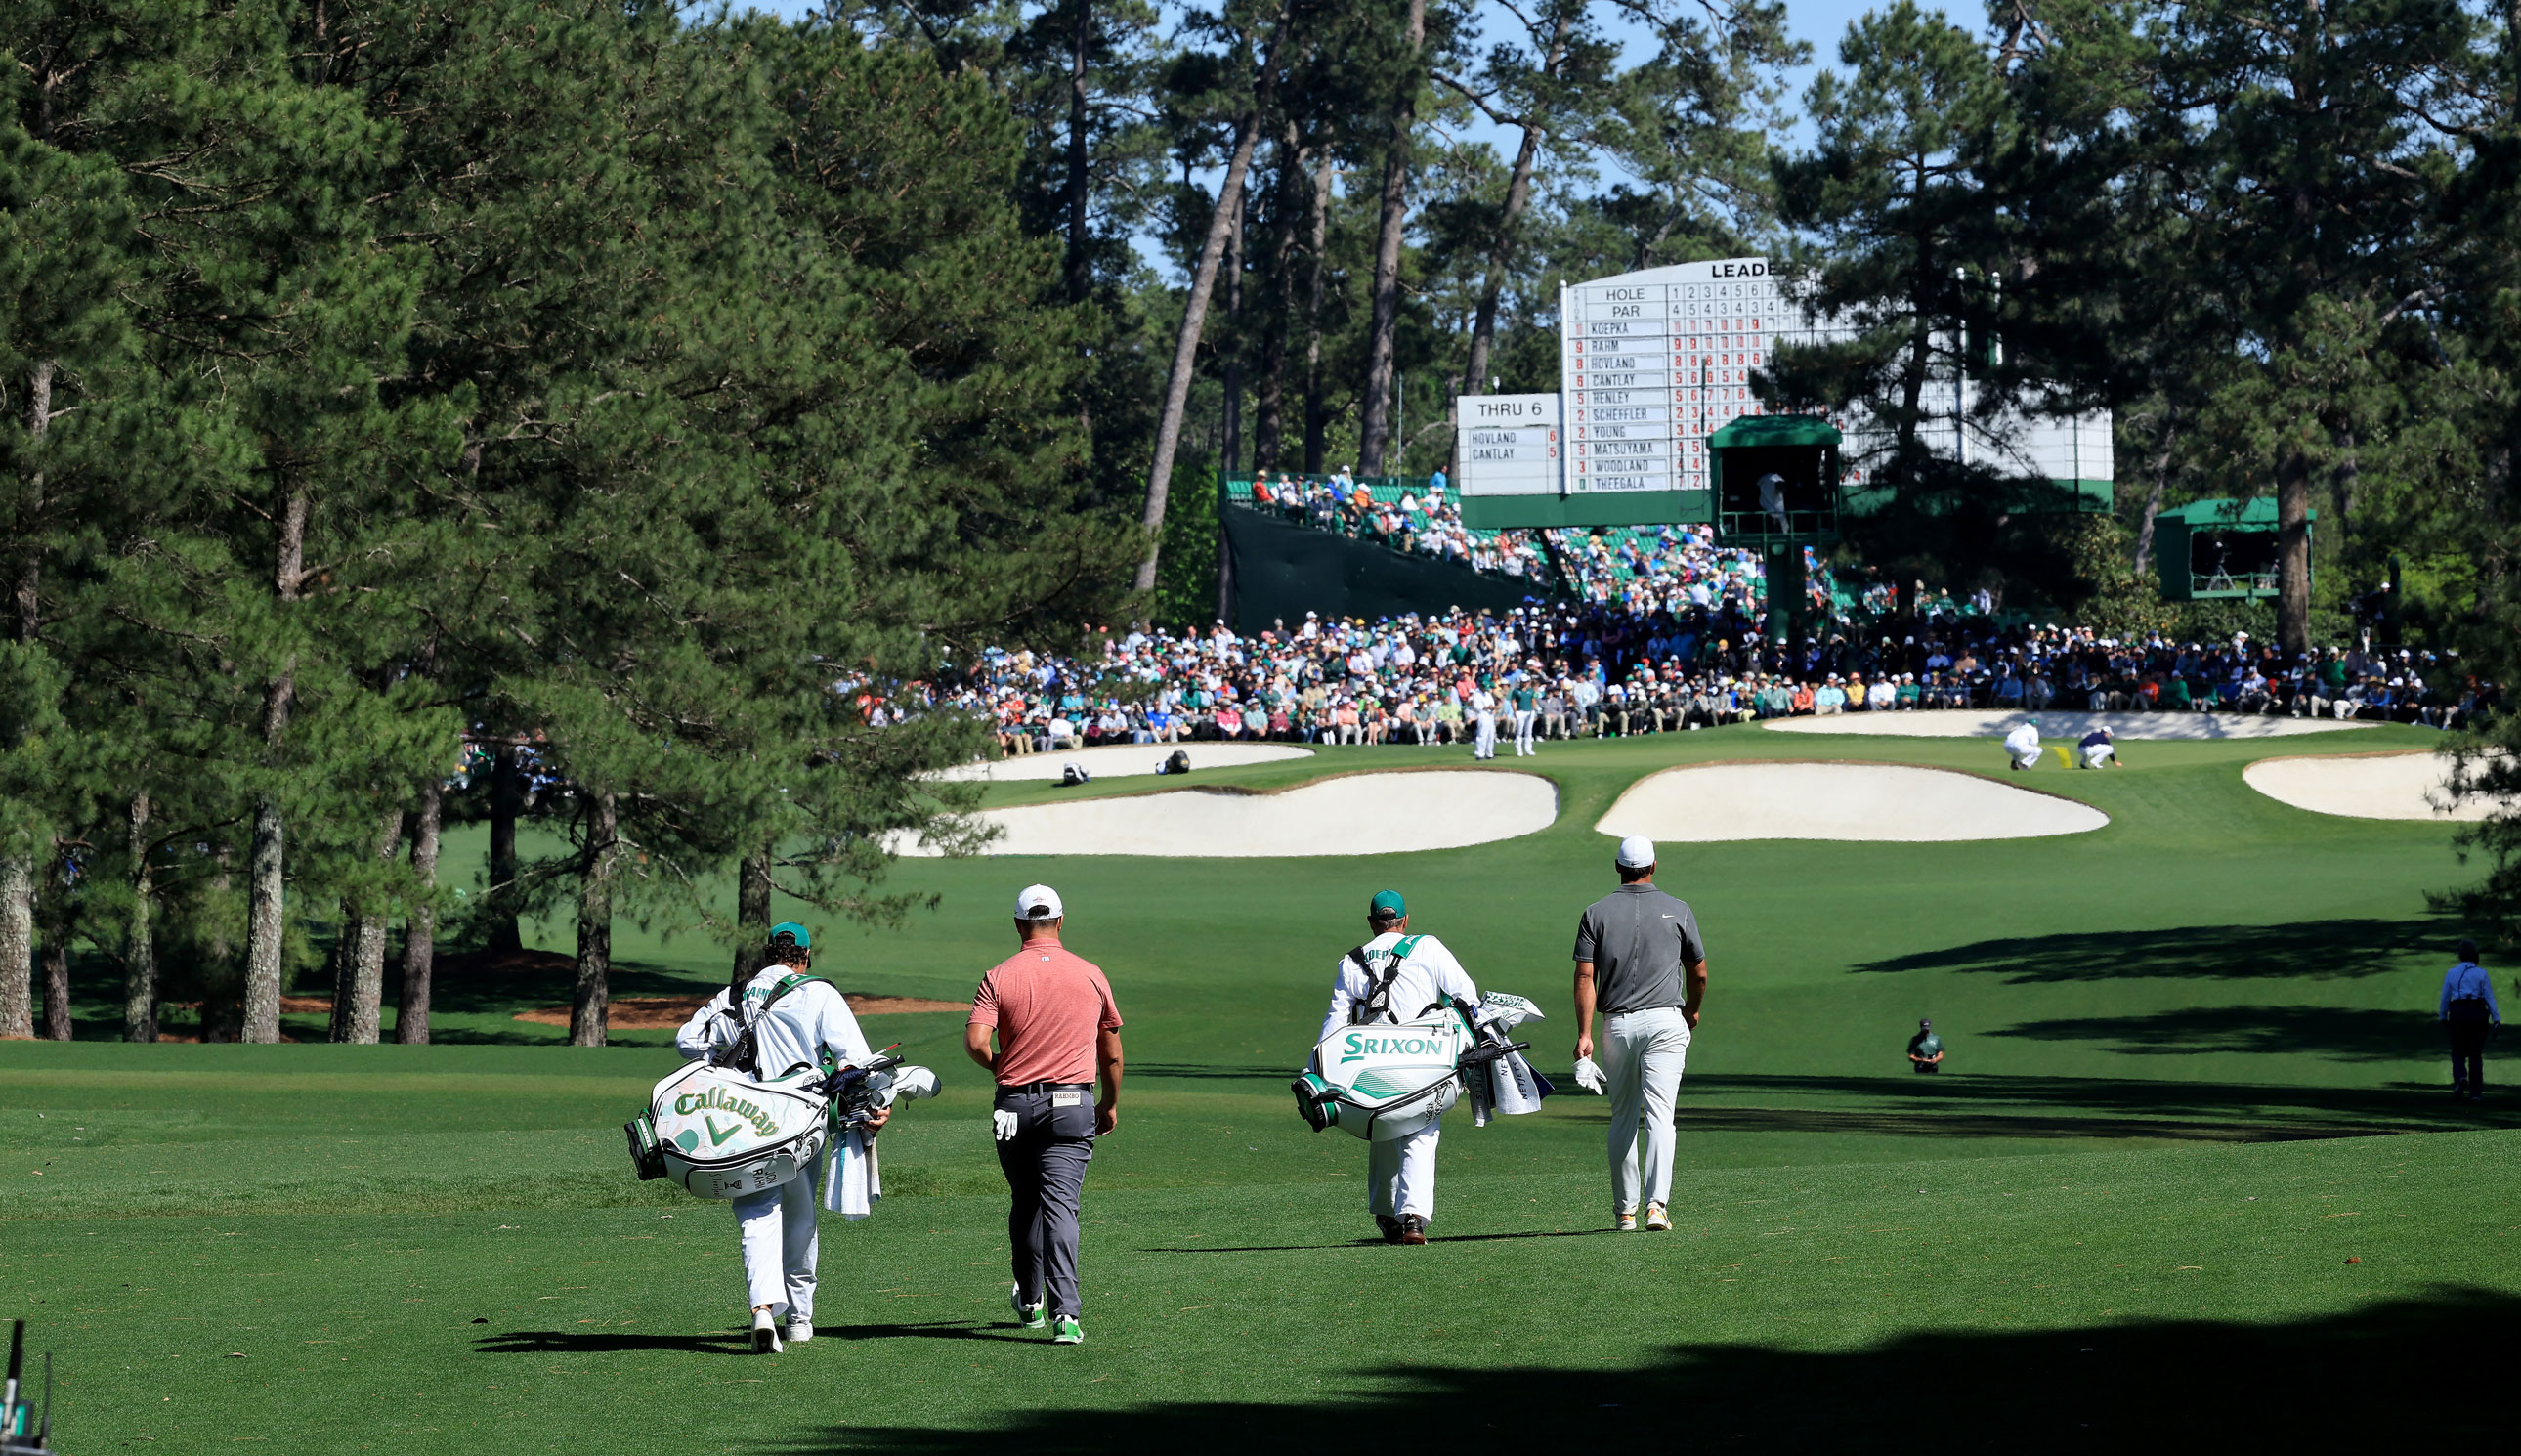 Jon Rahm, Brooks Koepka and their two caddies walk up the seventh hole at Augusta National during the Masters